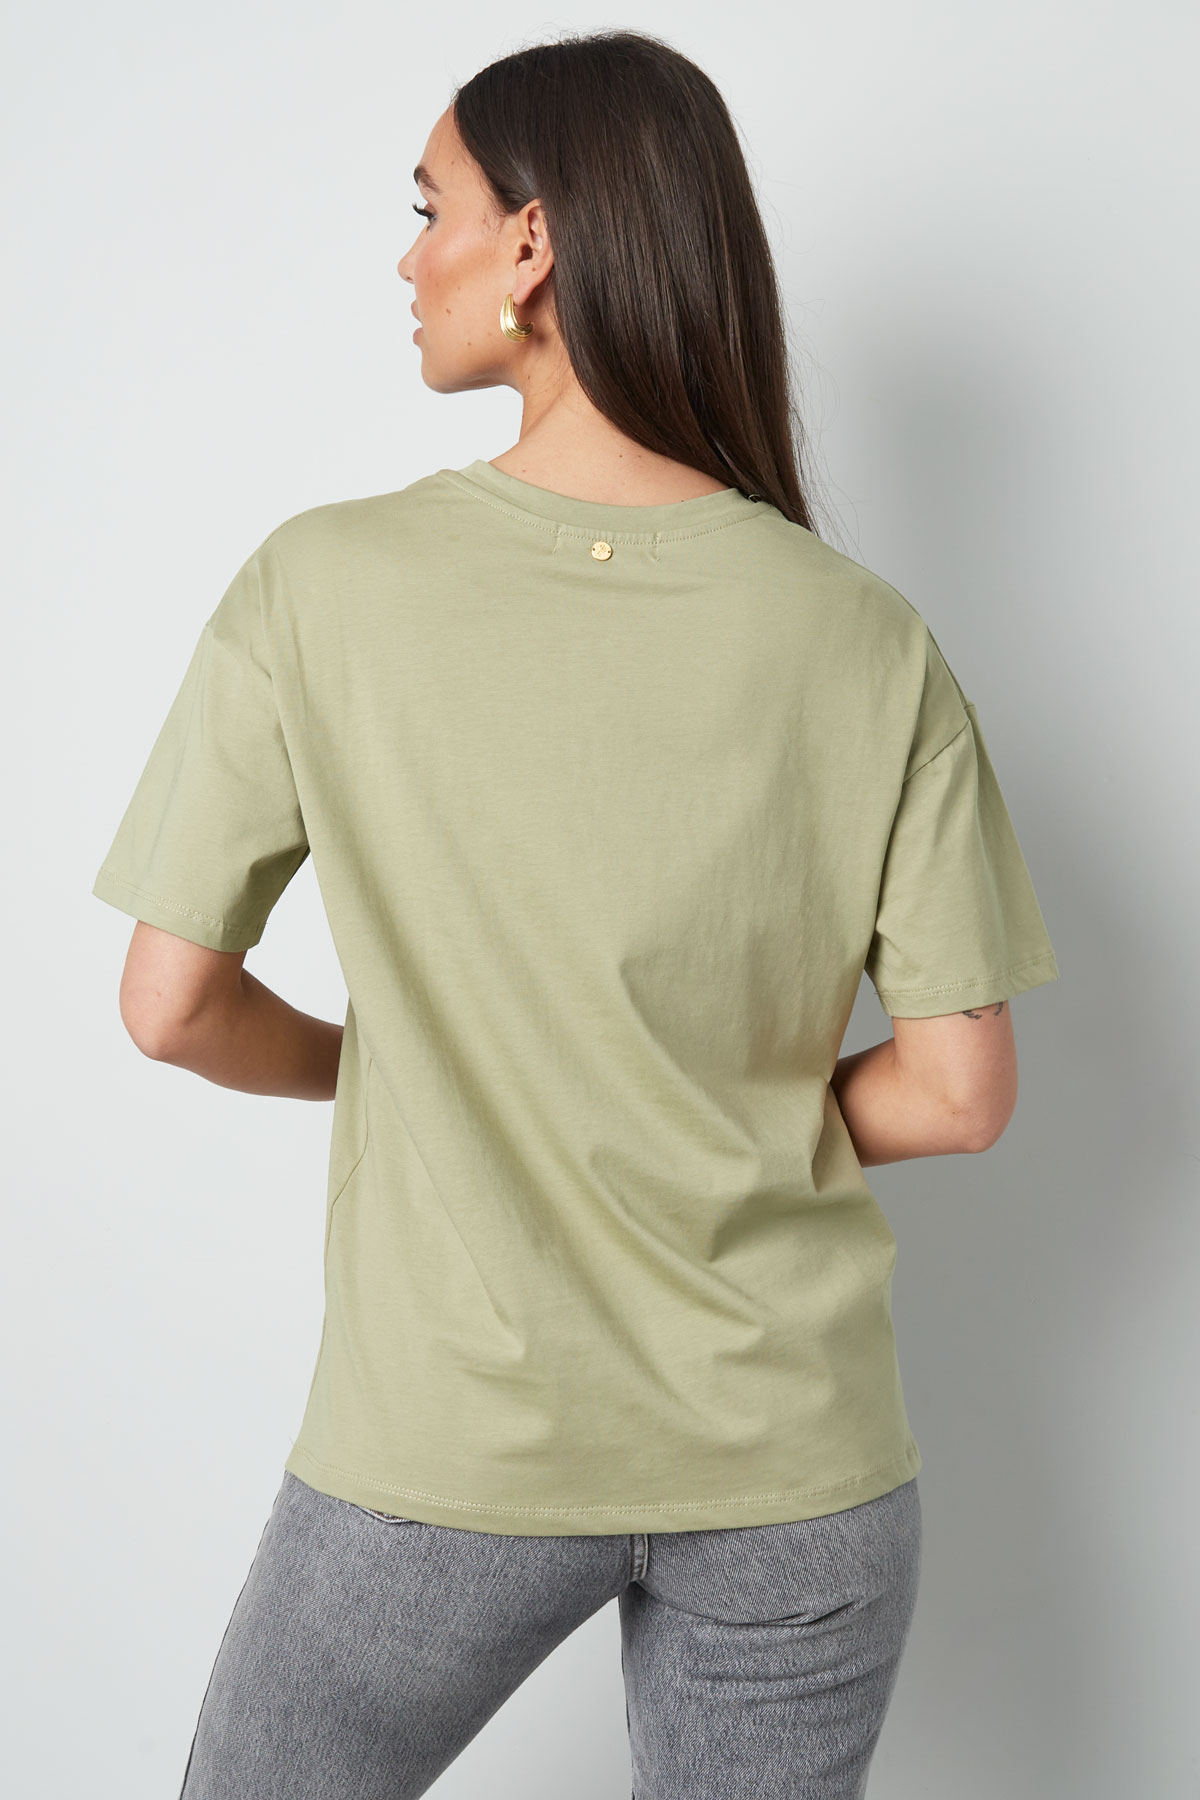 T-shirt ma perle - green h5 Picture6